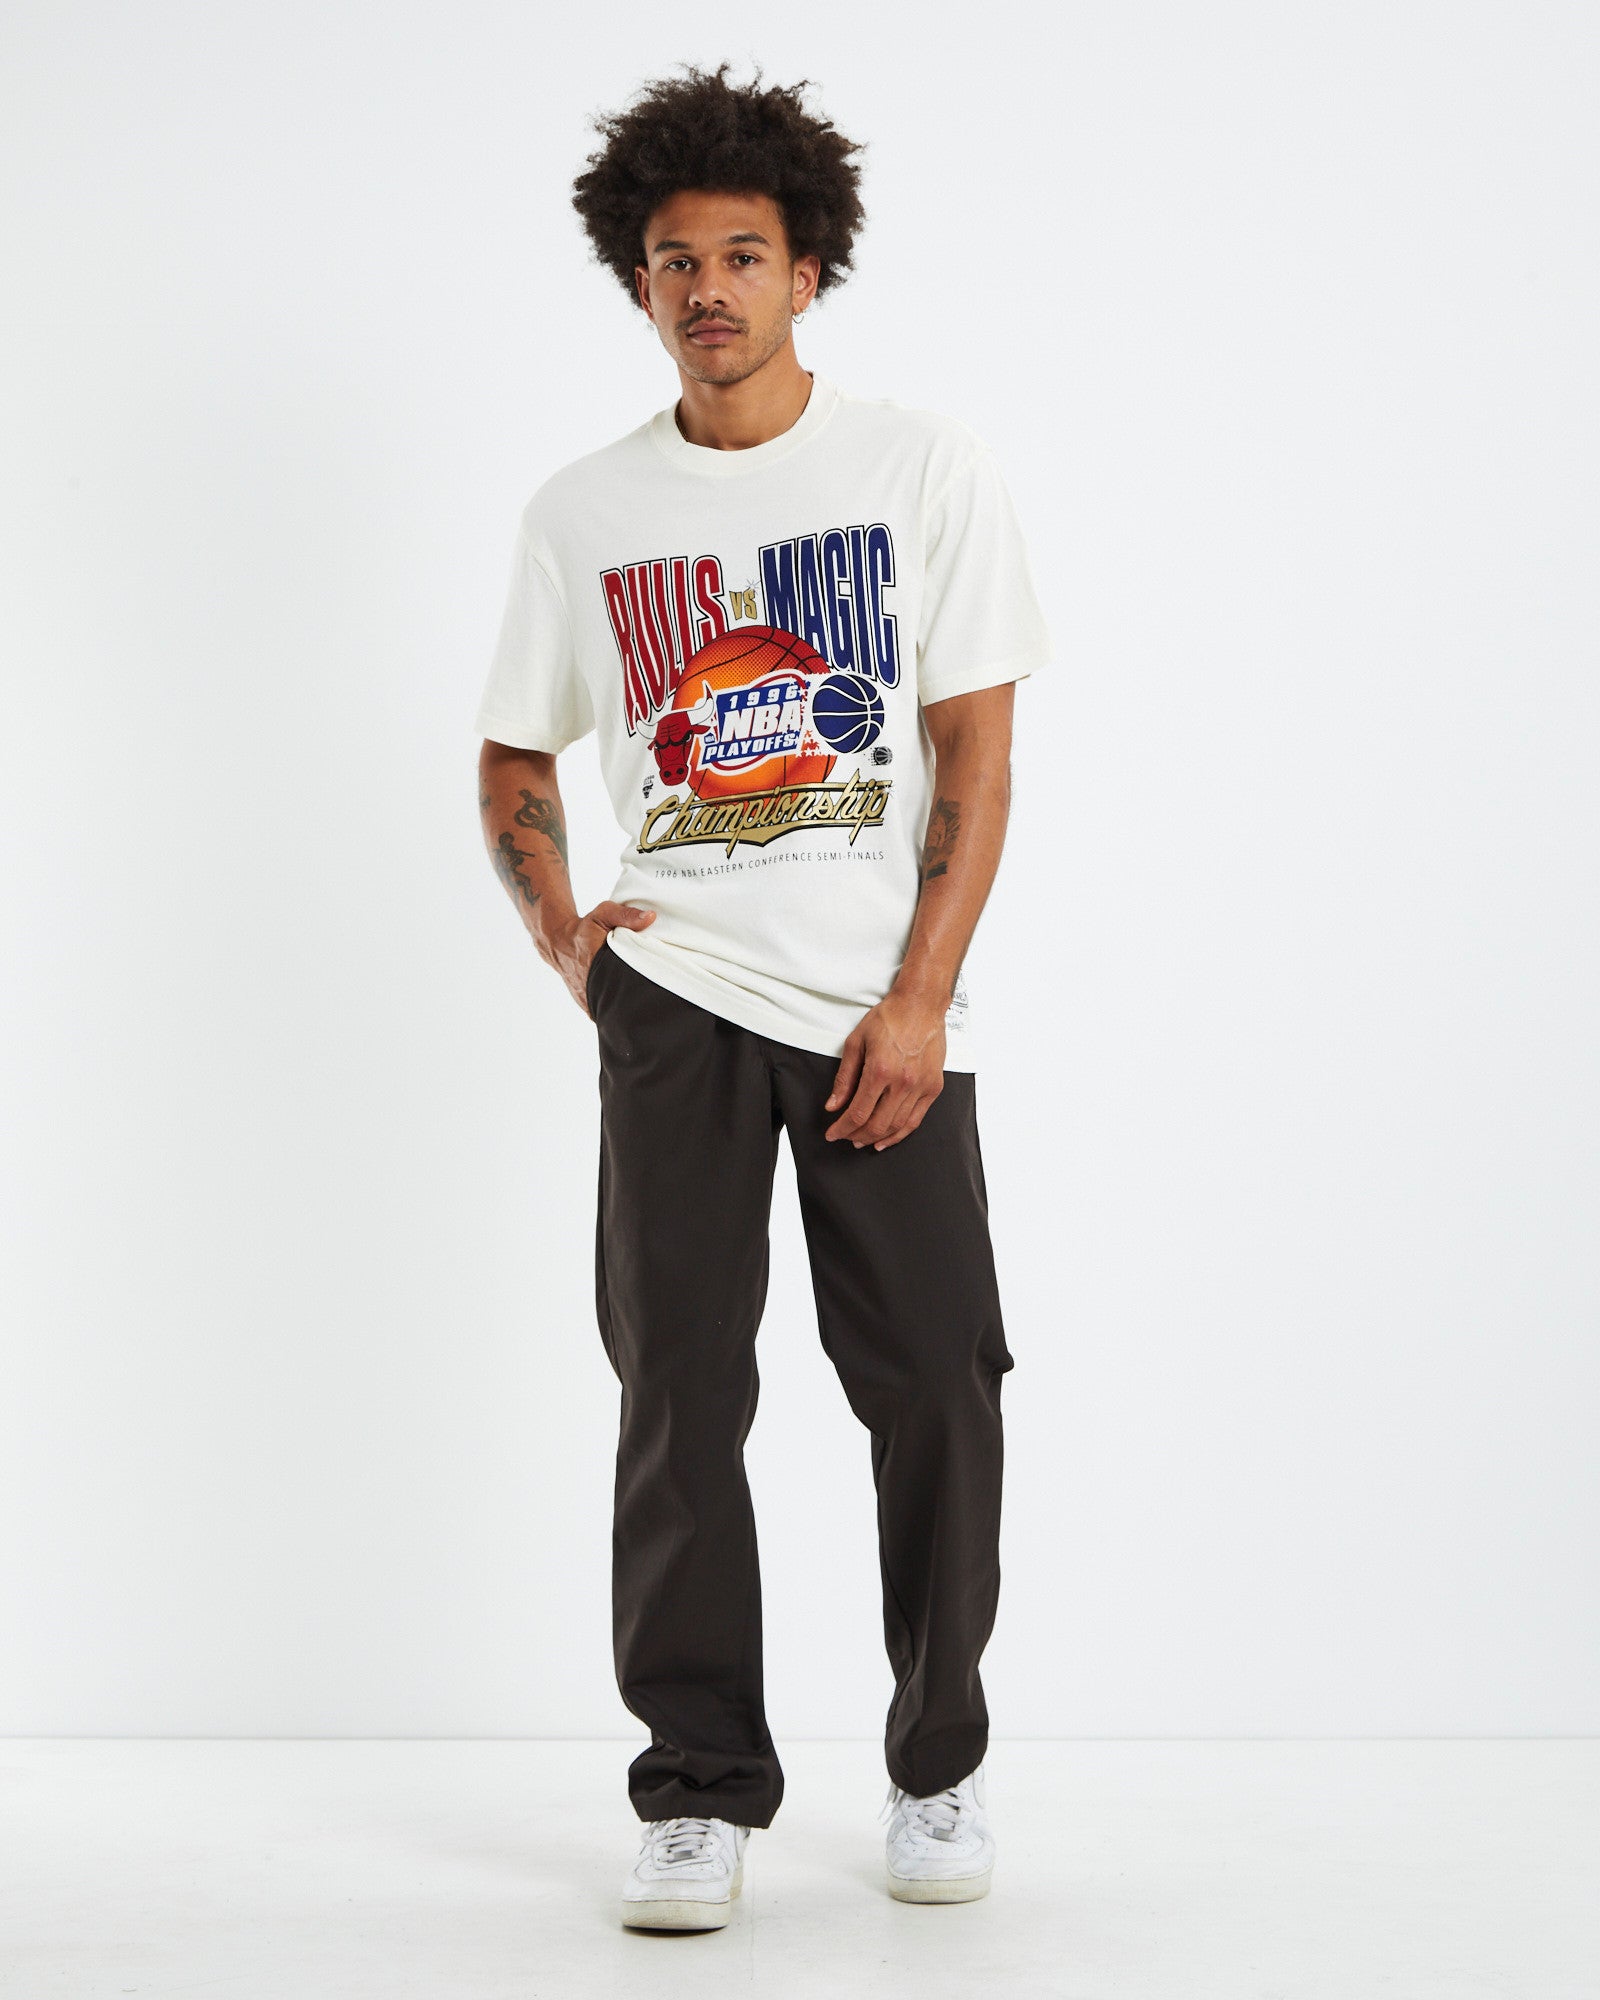 MNA-M25 (Mitchell and ness road to the final tee nba worn white) 12393913